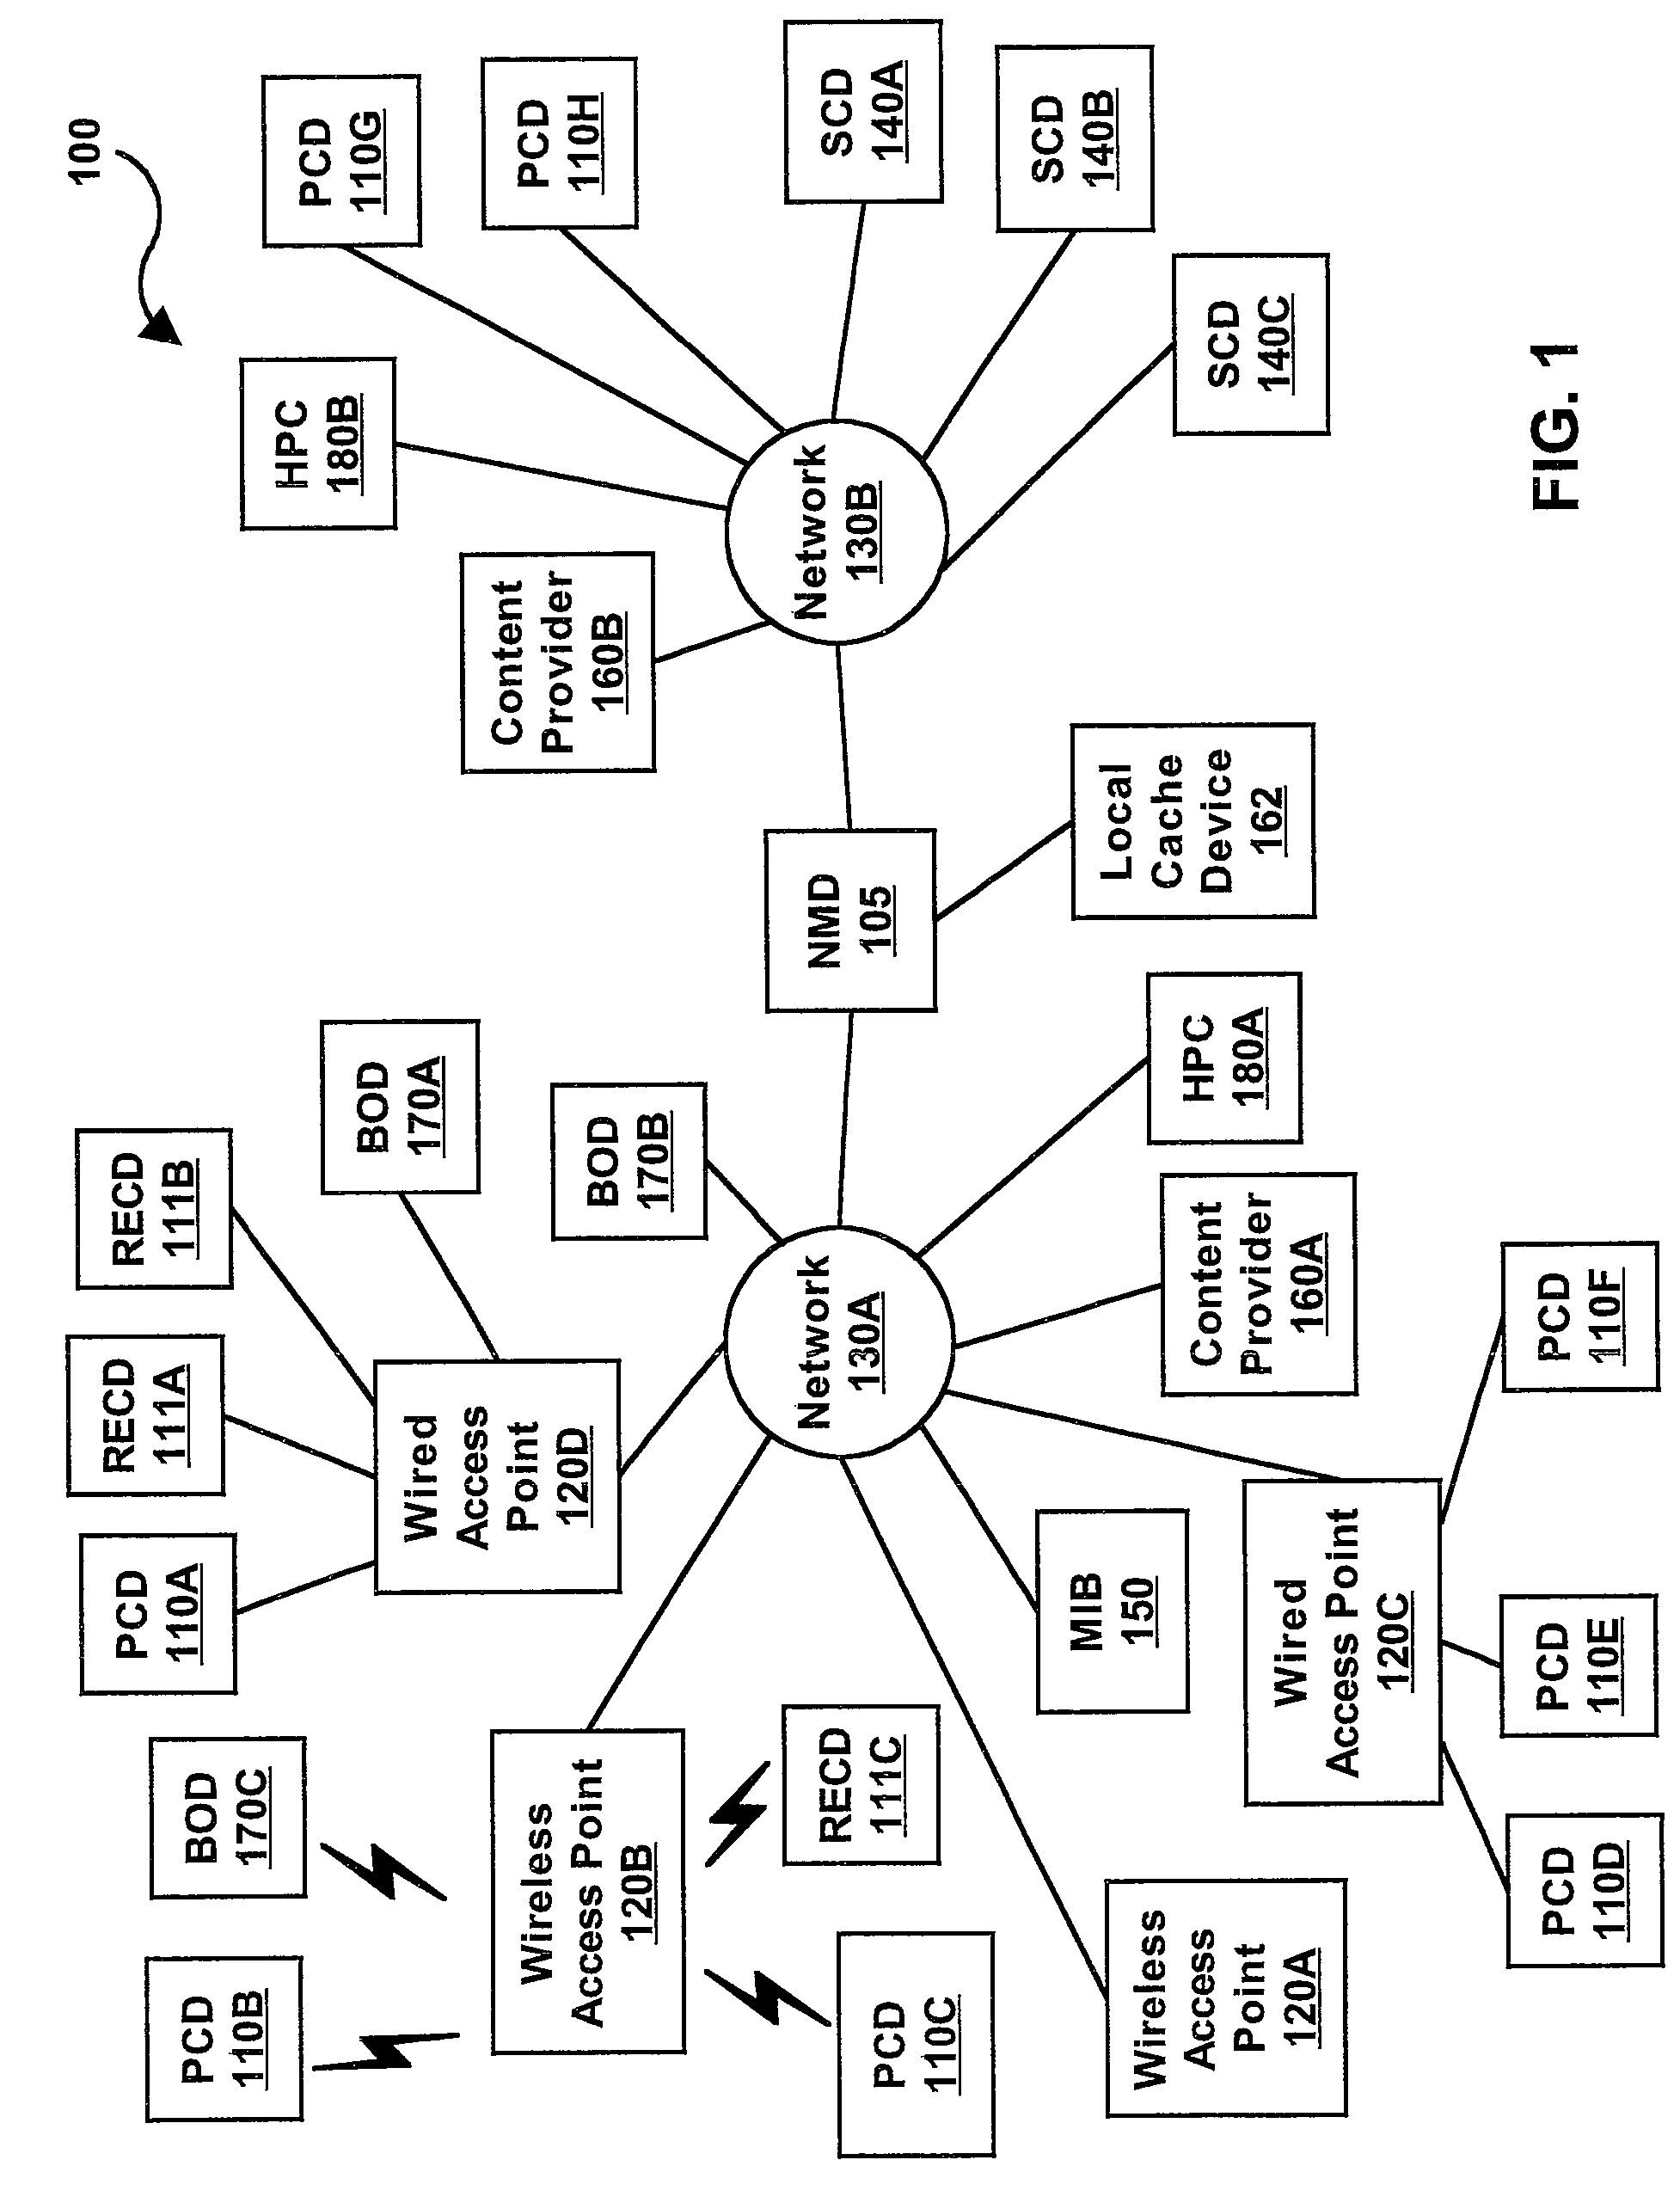 System and method for providing application categorization and quality of service in a network with multiple users